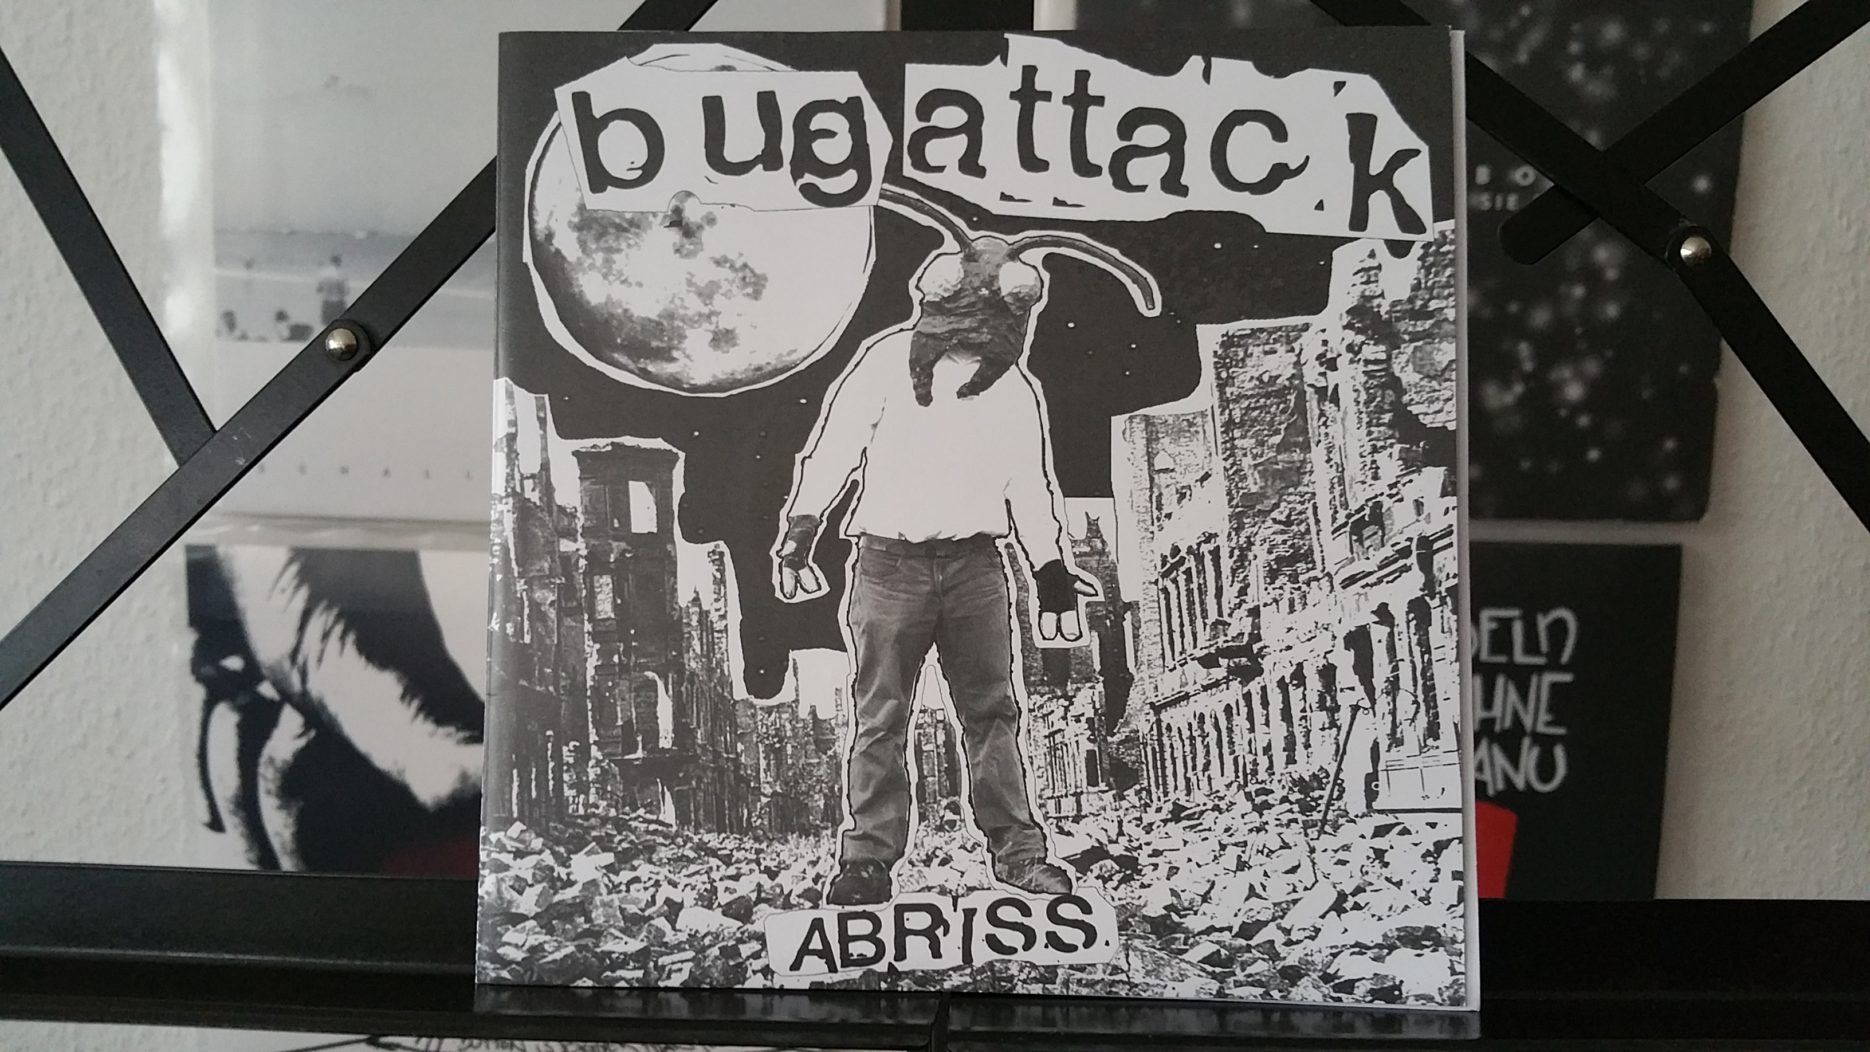 review: BUG ATTACK – abriss 7inch